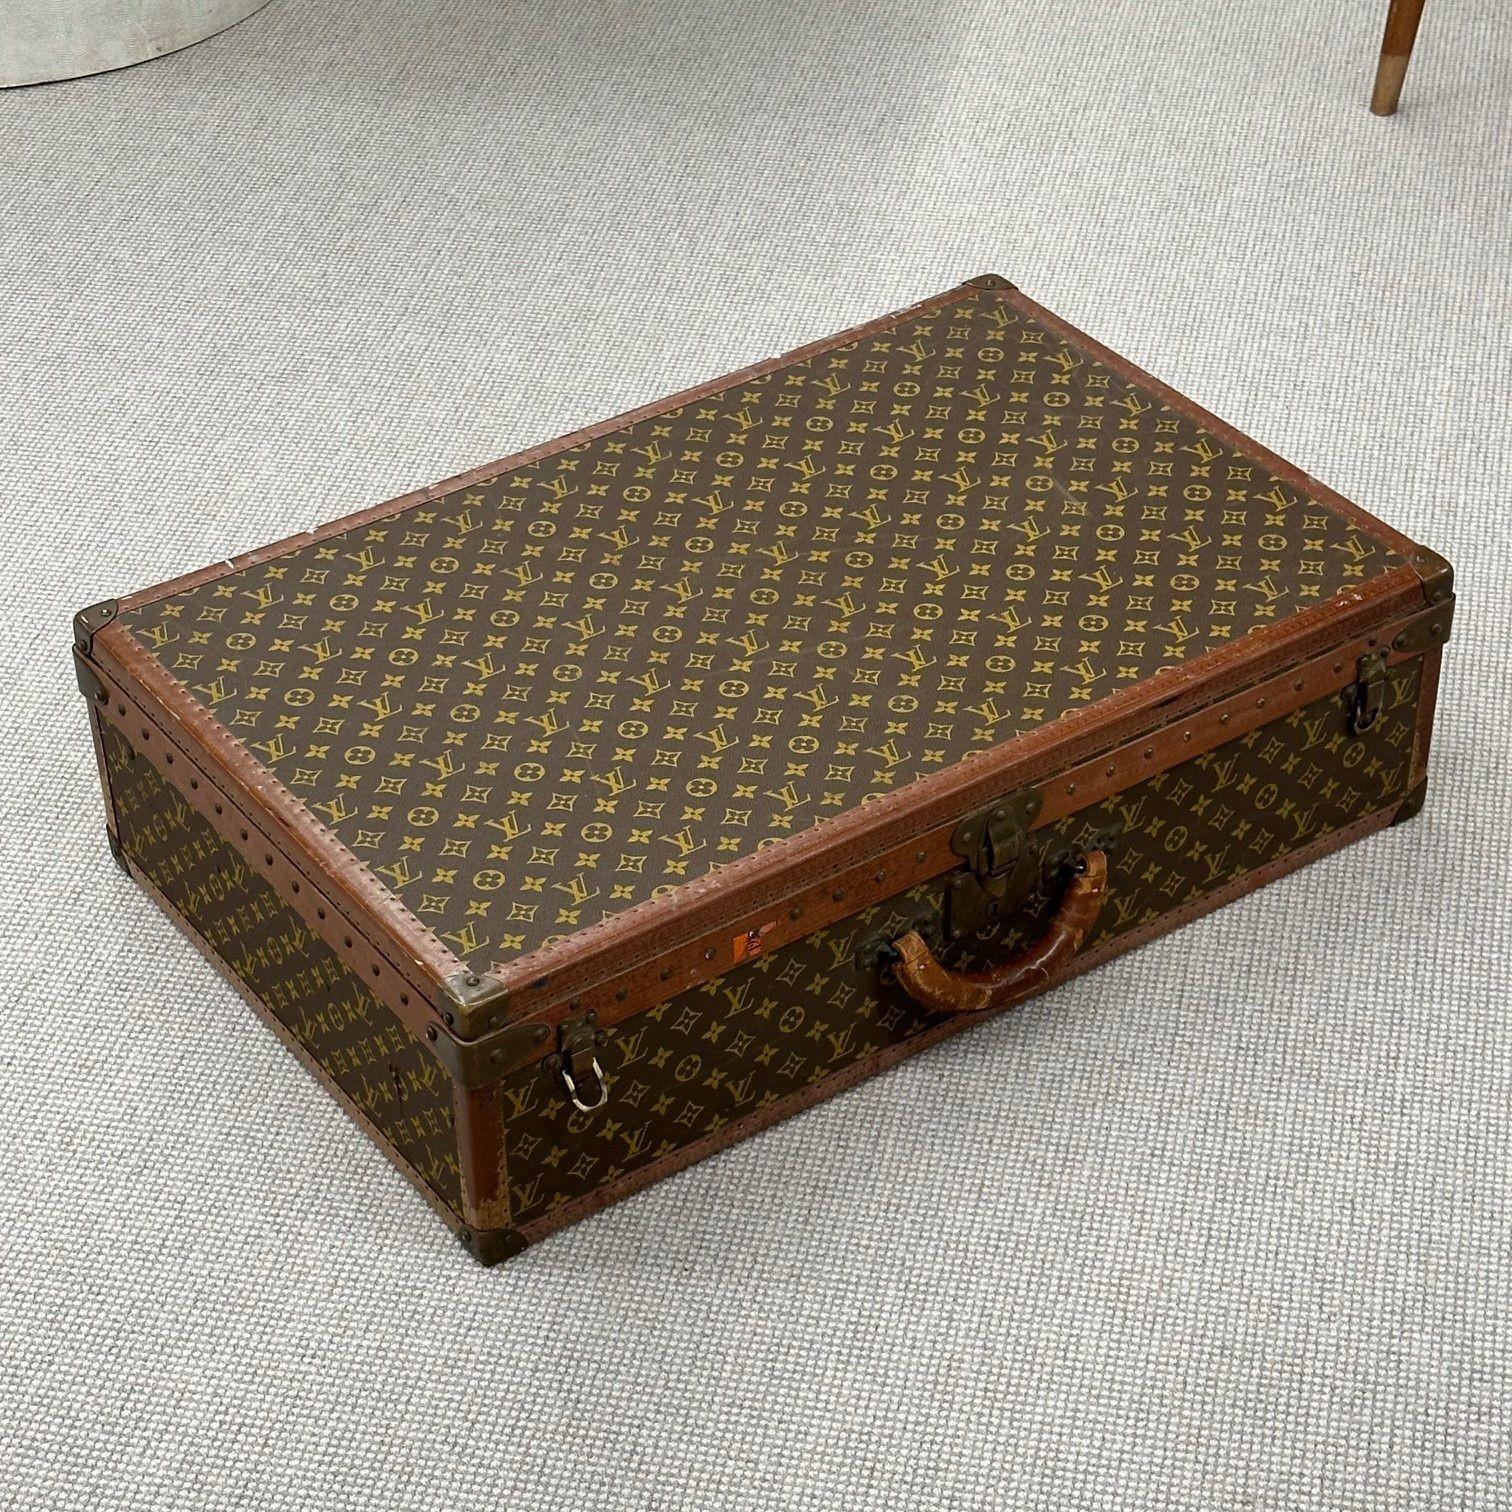 Canvas Louis Vuitton Monogram Suitcase / Luggage or Trunk, Alzer 80, Mid 20th Century For Sale